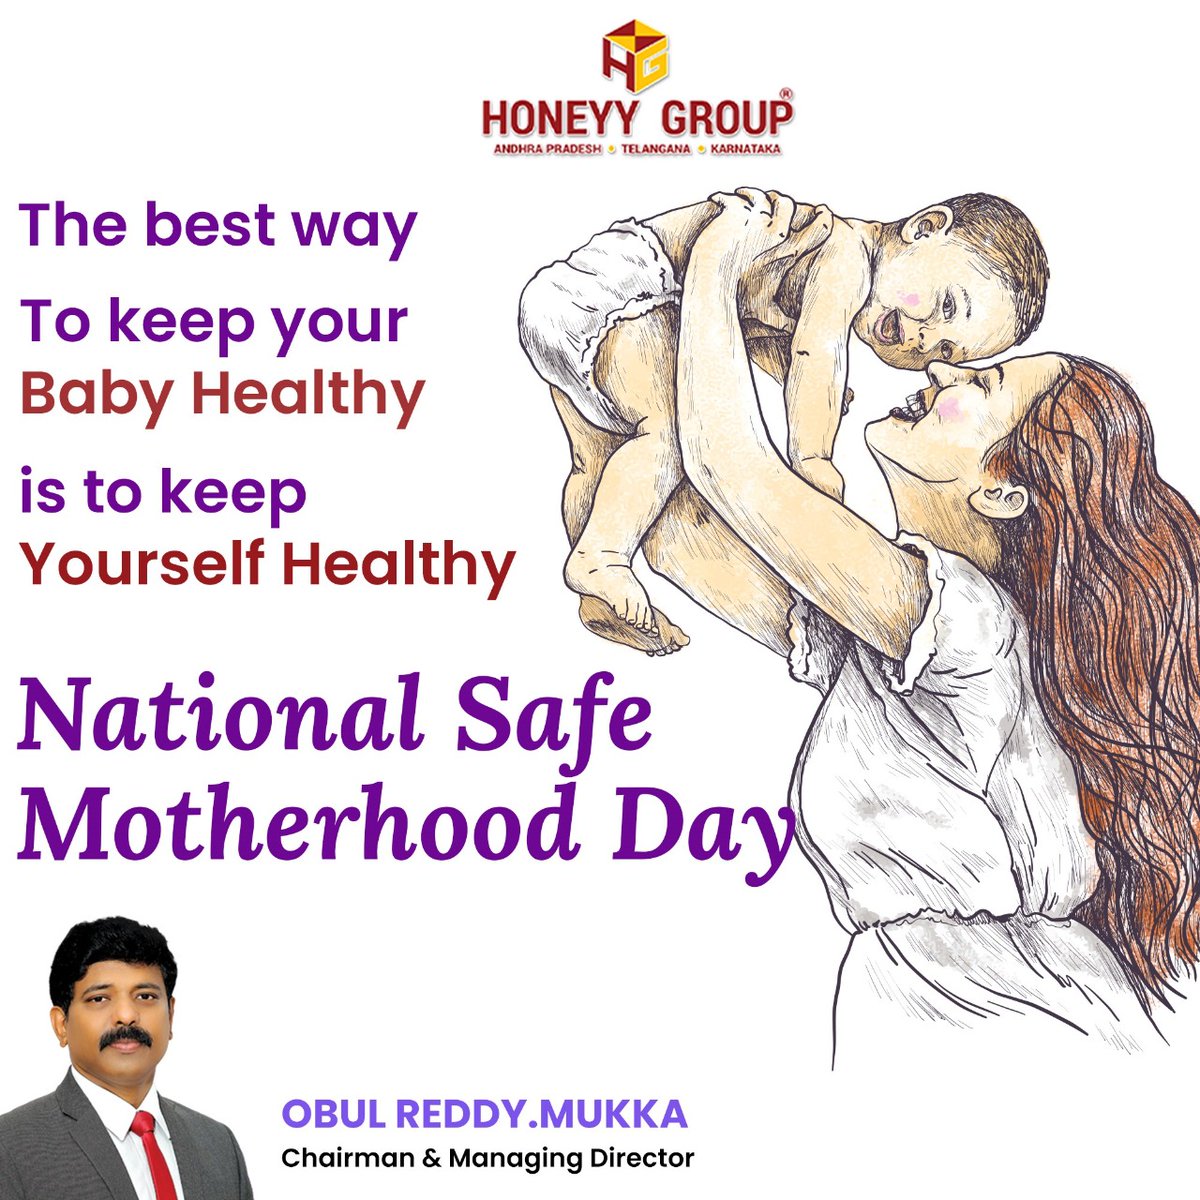 We believe that raising awareness and providing information and education to women, regarding safe motherhood, has been and will be the key to improve the life quality of pregnant women and newborns.
#NationalSafeMotherhoodDay #motherhood  #healthcare  #HerHealthMatters #MomToBe